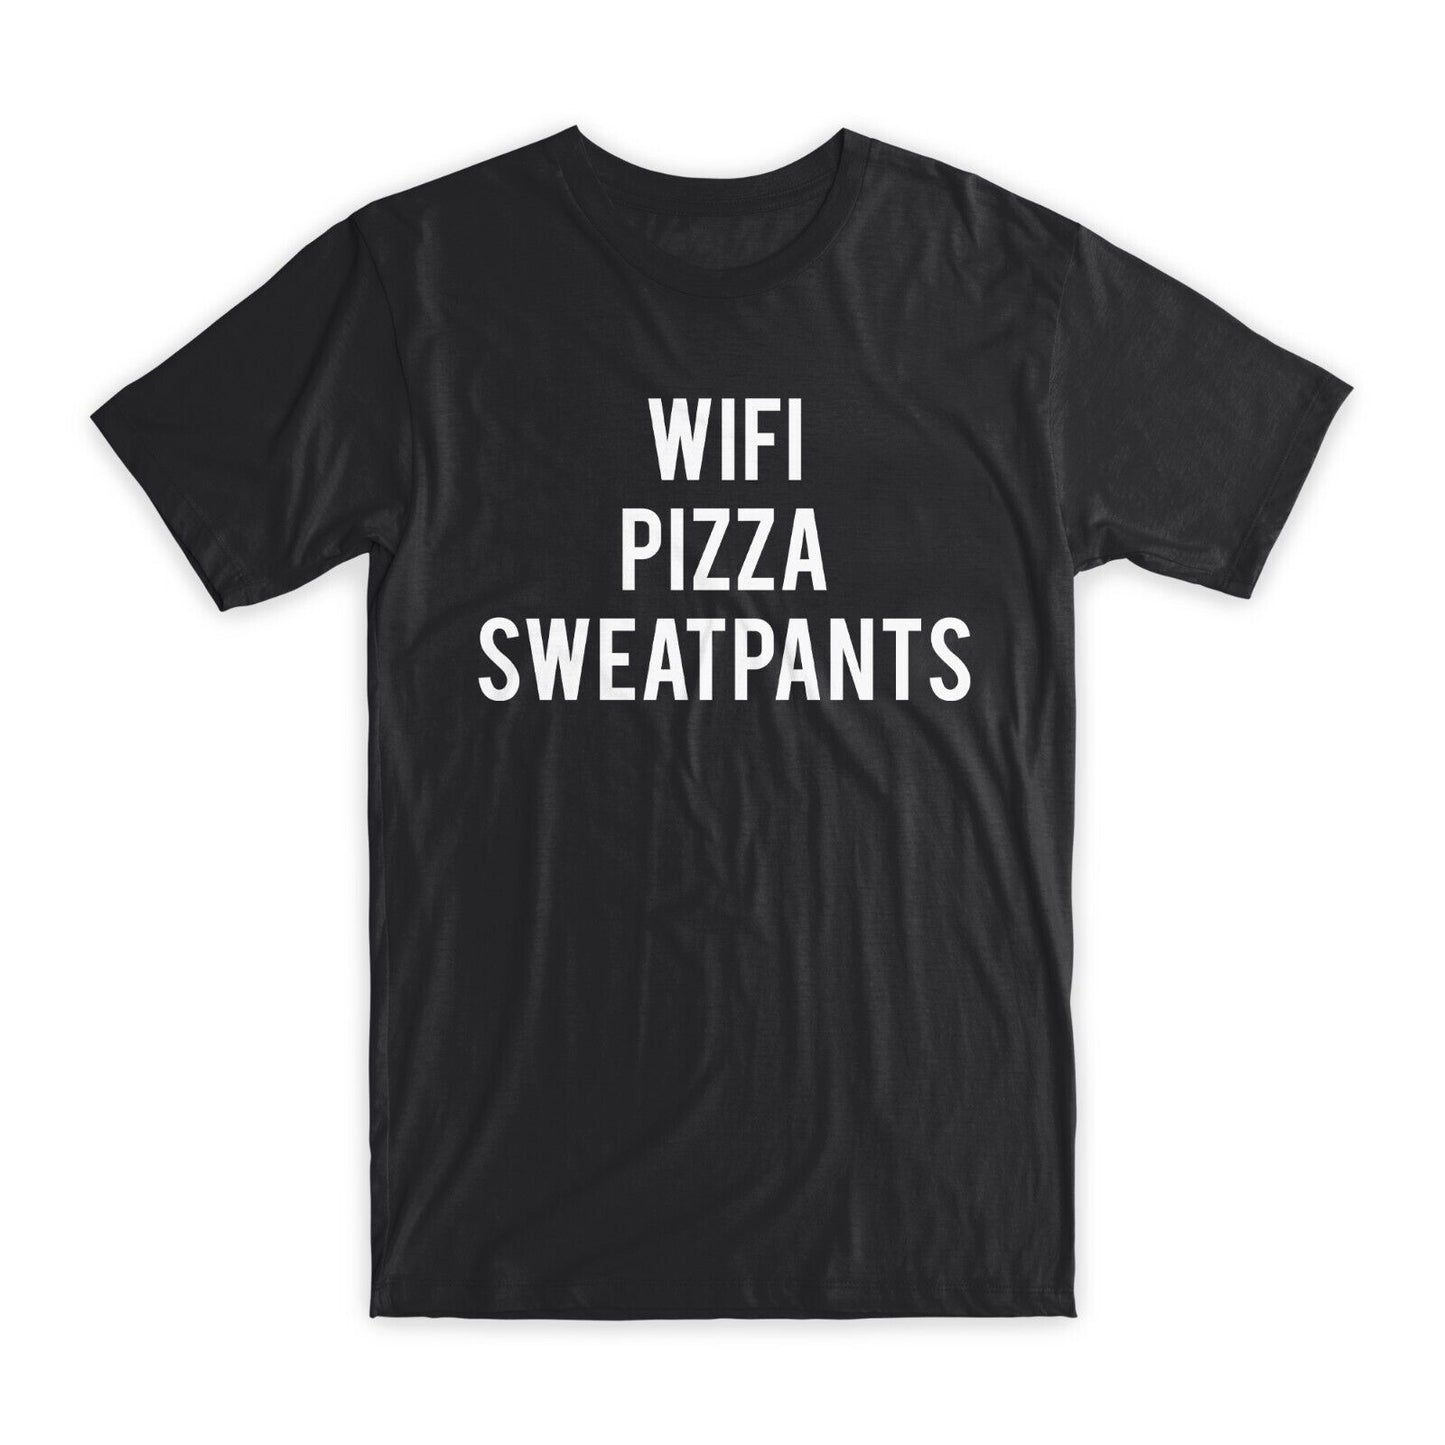 Wifi Pizza Sweatpants T-Shirt Premium Soft Cotton Crew Neck Funny Tees Gifts NEW